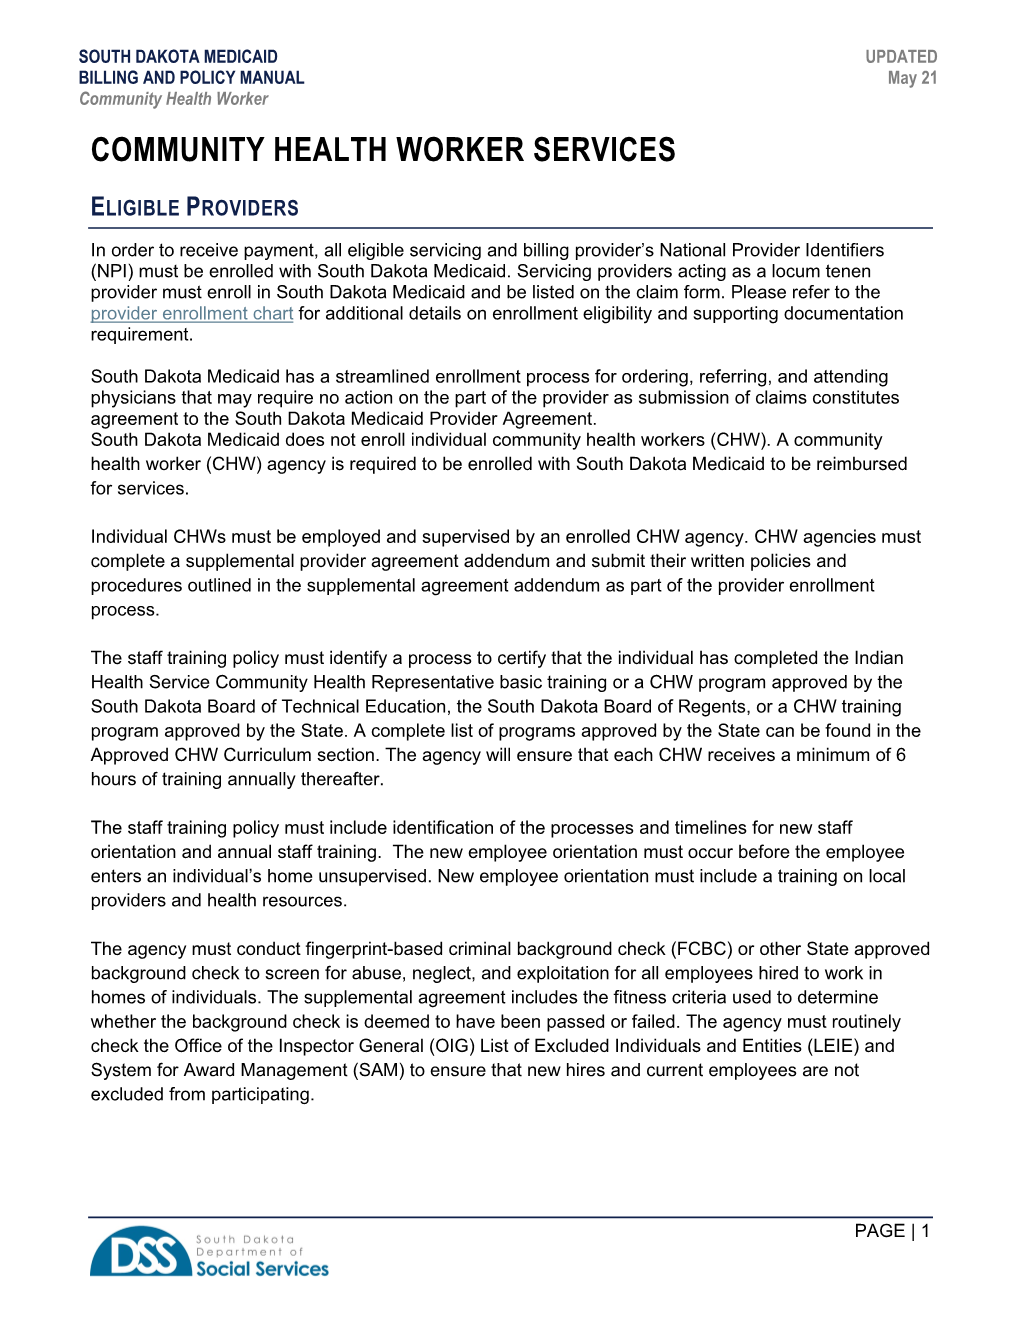 Community Health Worker Services